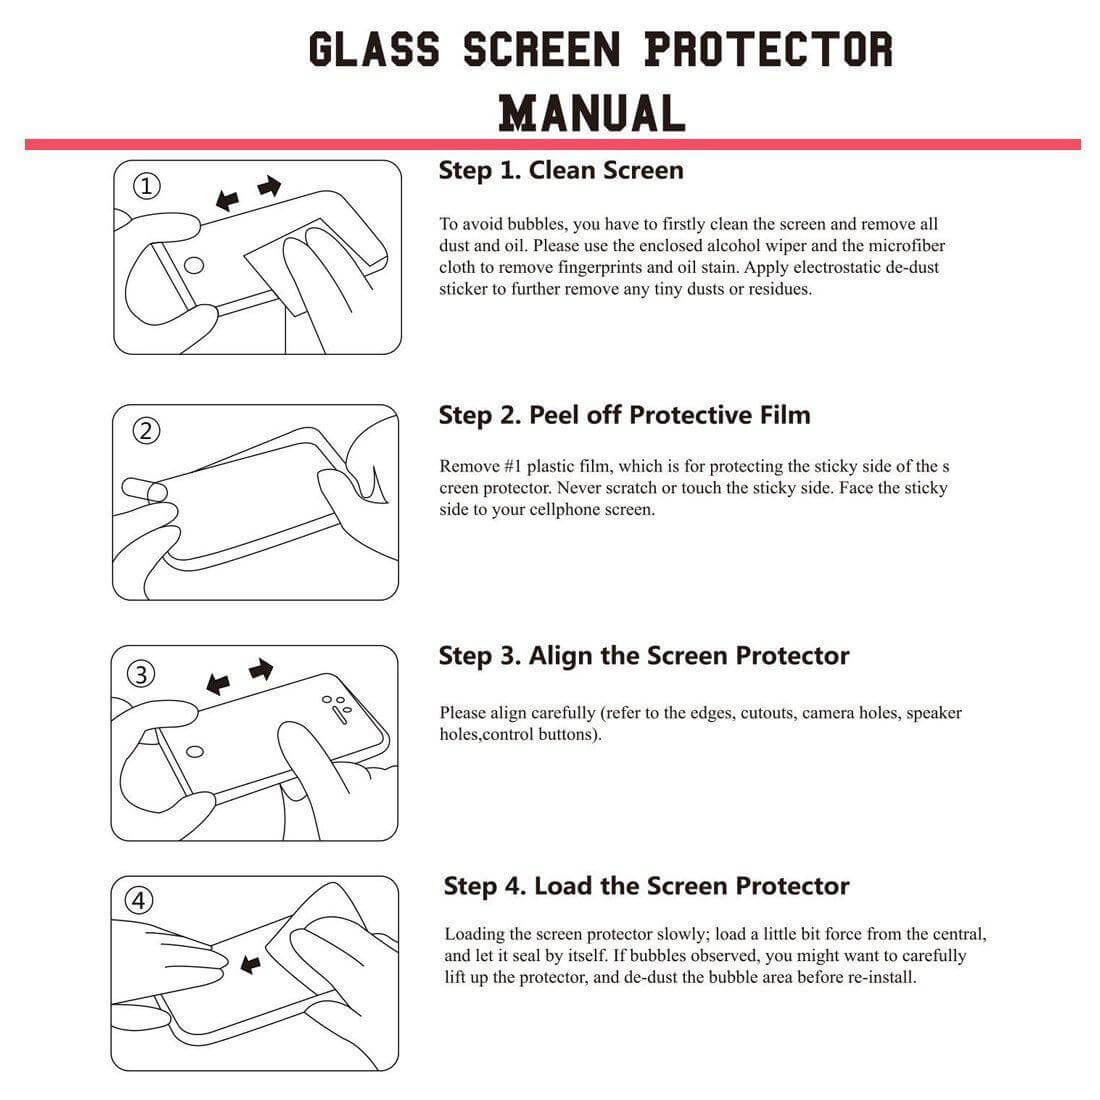 For Google Pixel 8 Tempered Glass / Screen Protector